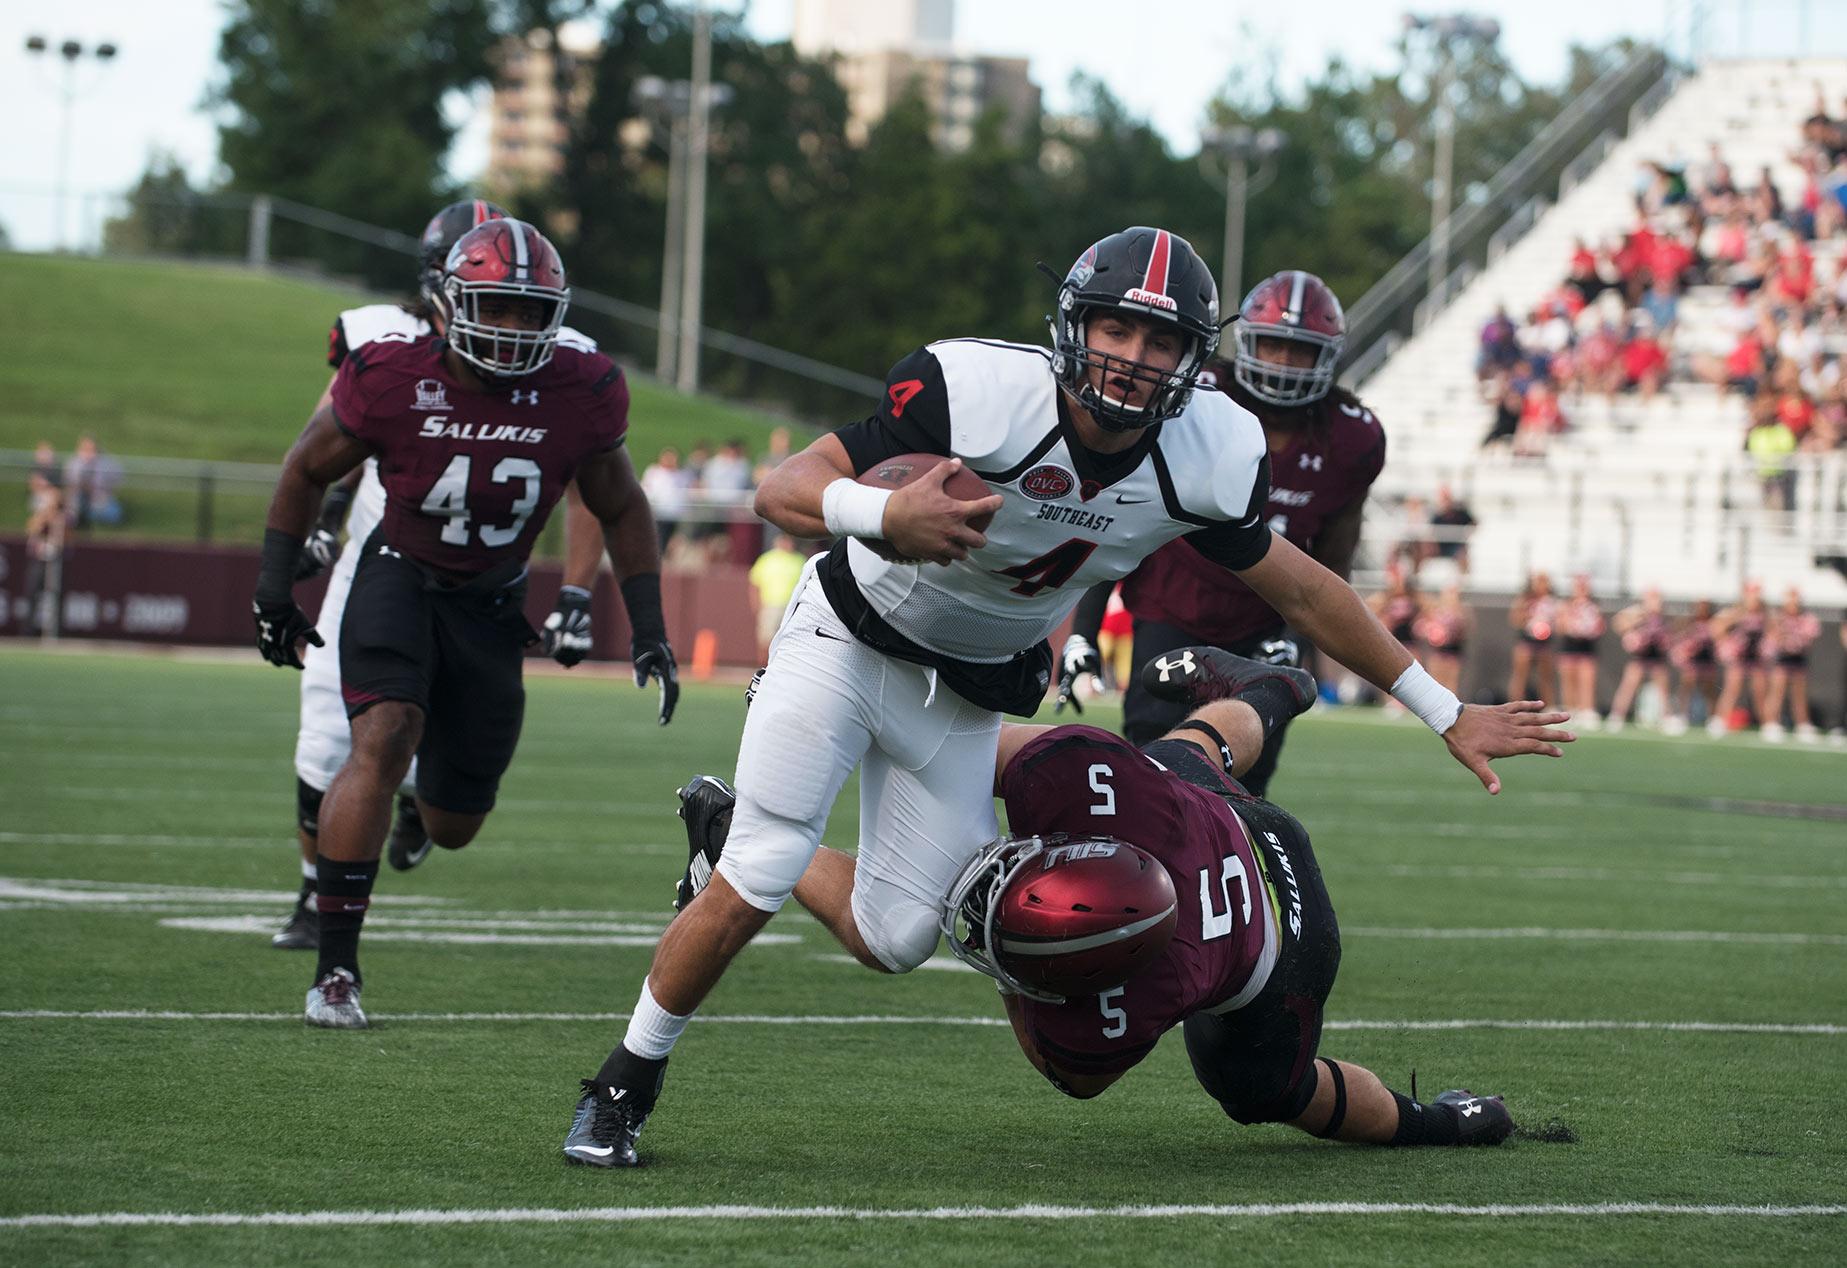 Saluki senior linebacker Chase Allen tackles SEMO junior quarterback Jesse Hosket during the first half of the Salukis' matchup against the Redhawks on Saturday, Sept. 10, 2016, at Saluki Stadium. (Jacob Wiegand | @JacobWiegand_DE)